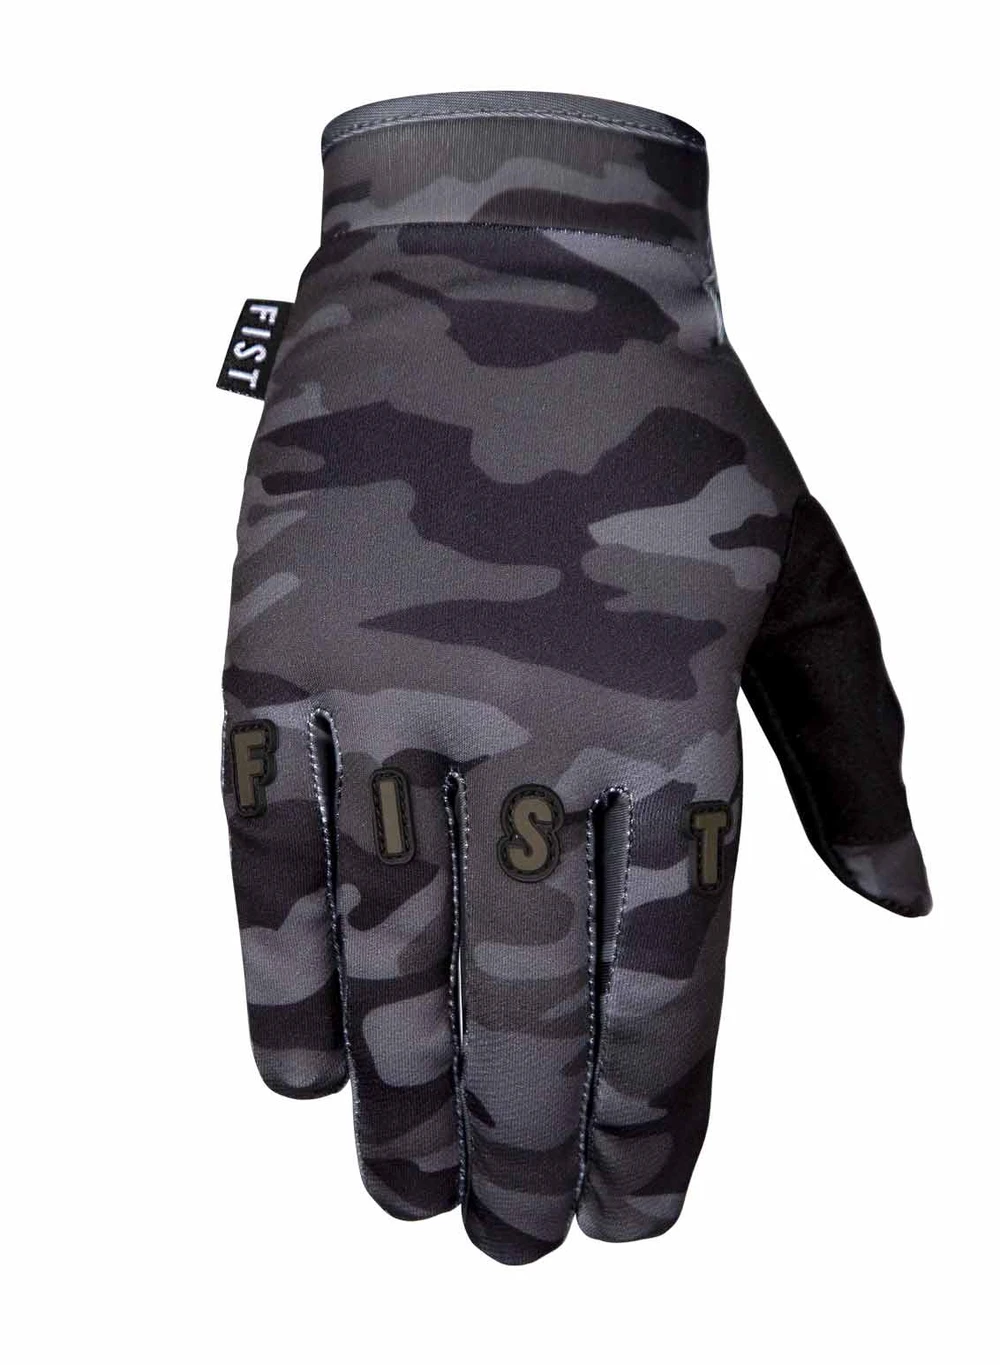 FIST GLOVES CHAPTER 14 "COVERT CAMO" YOUTH L Black/Grey